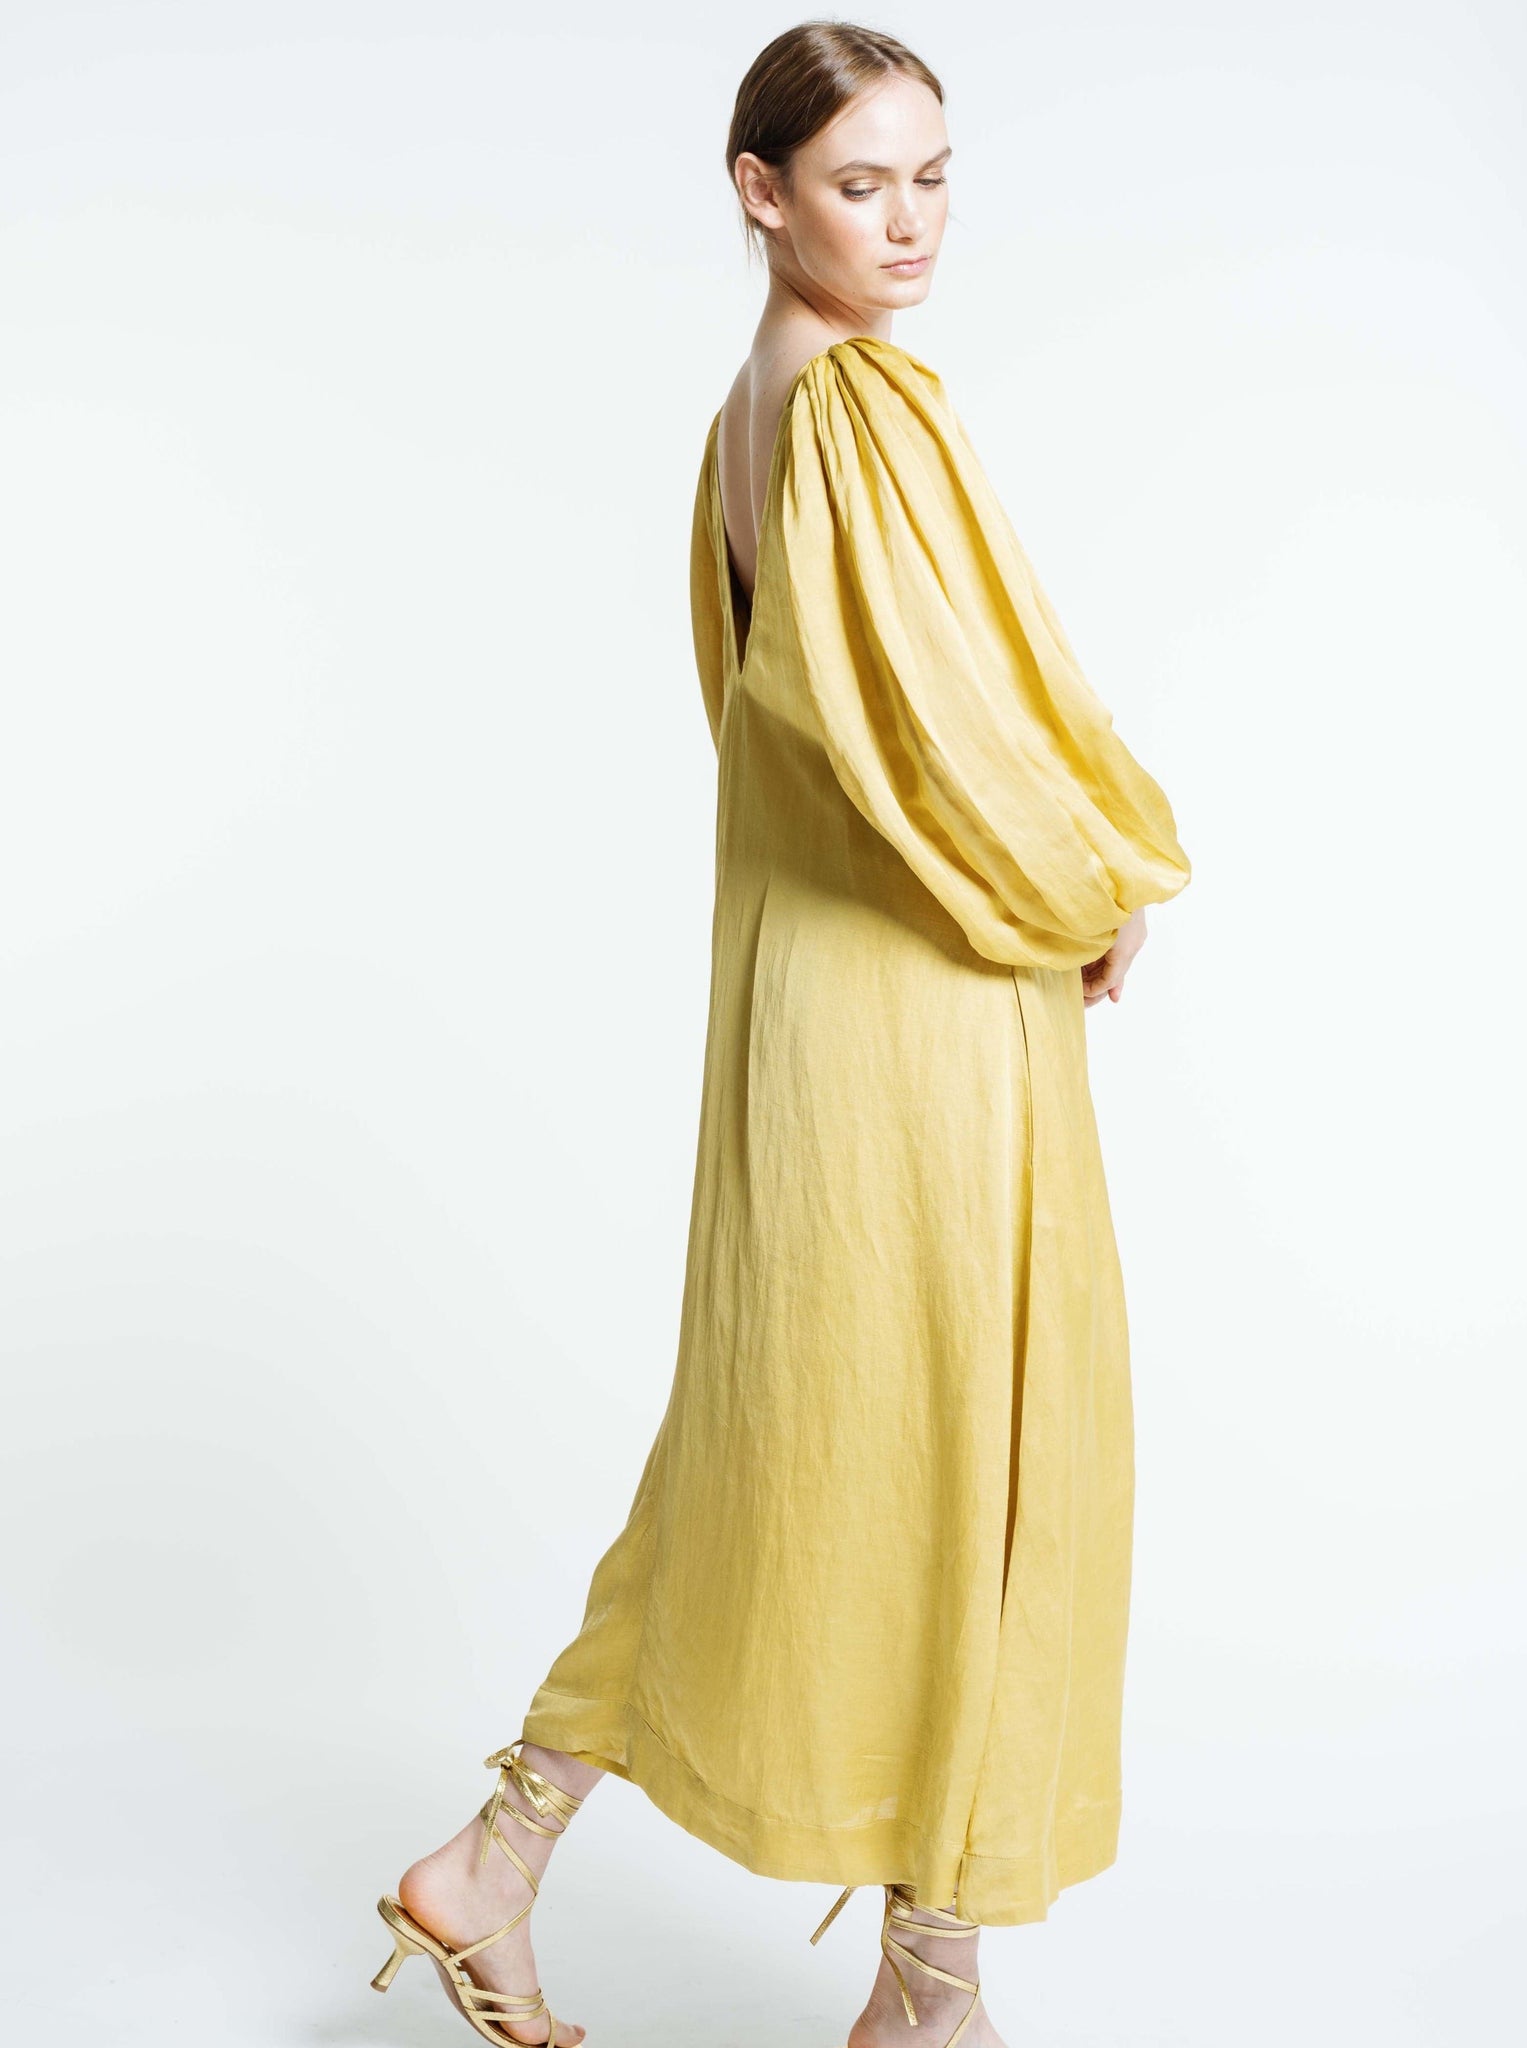 The model is wearing a Lupita Maxi Dress - Citrine.